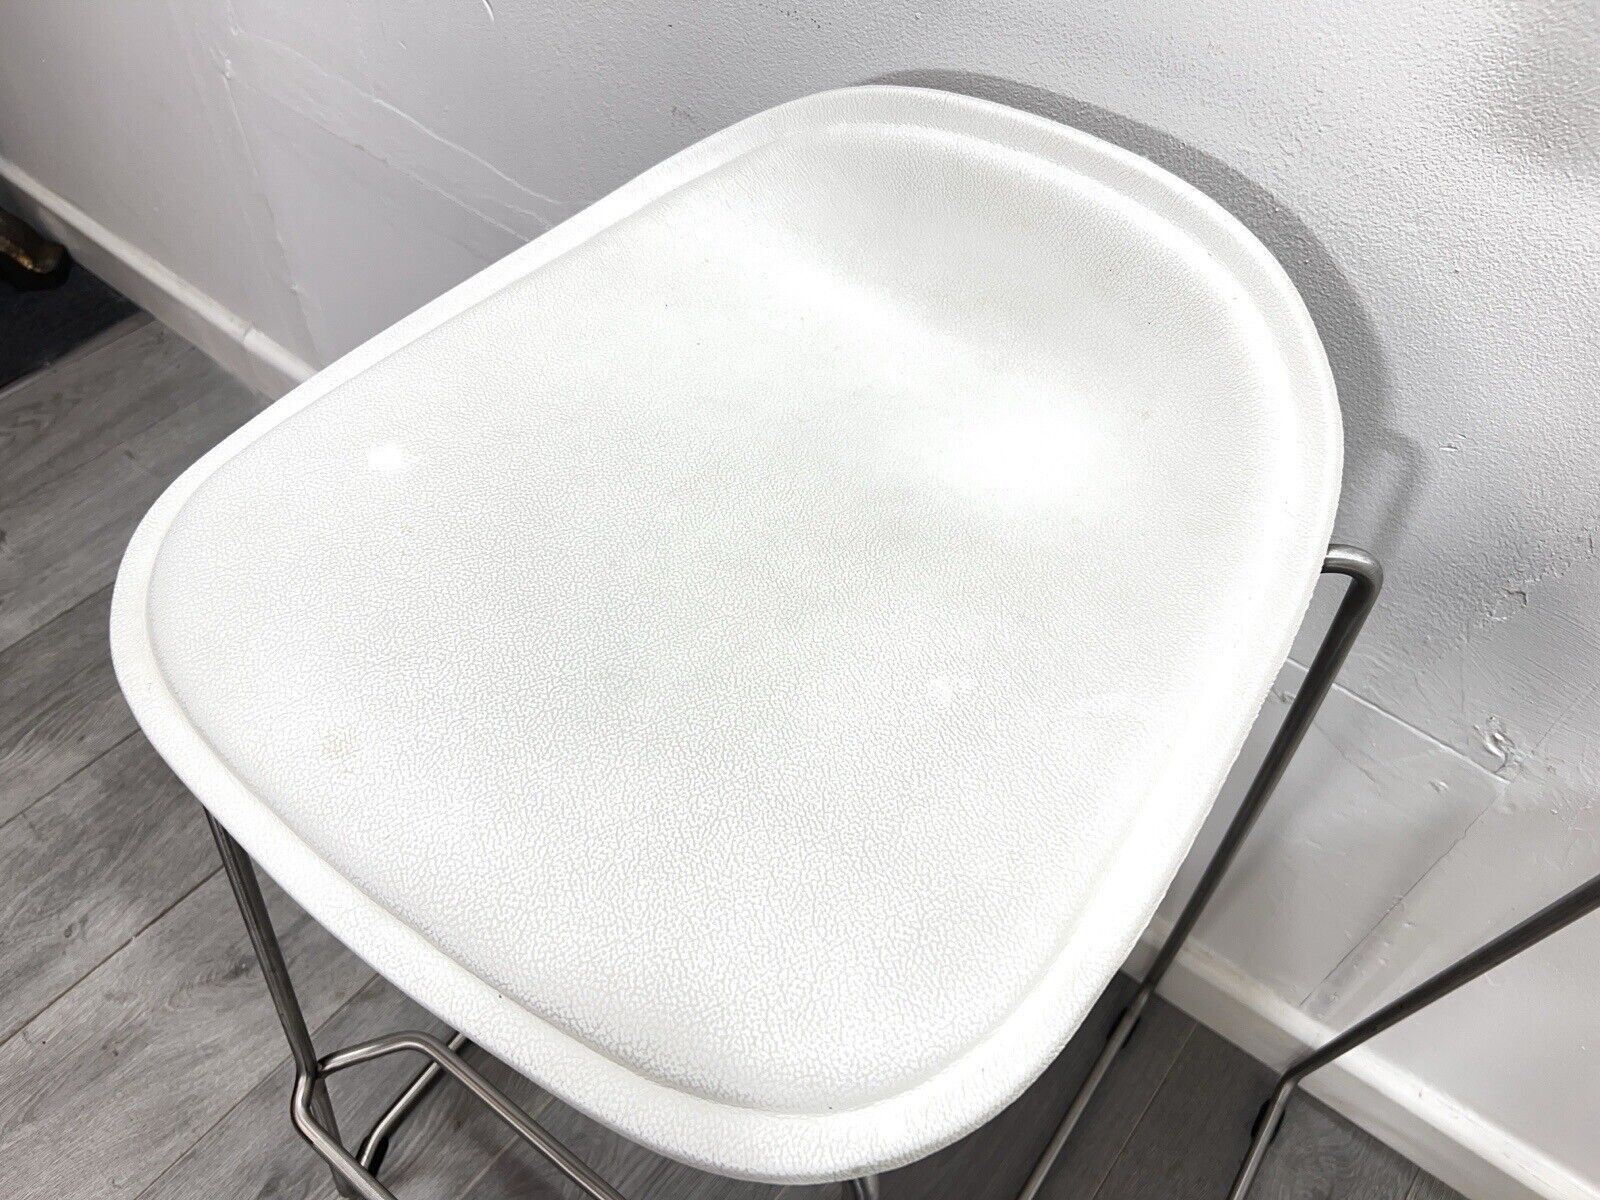 Pair of Modern White Leather Stools on a Stainless Steel Base